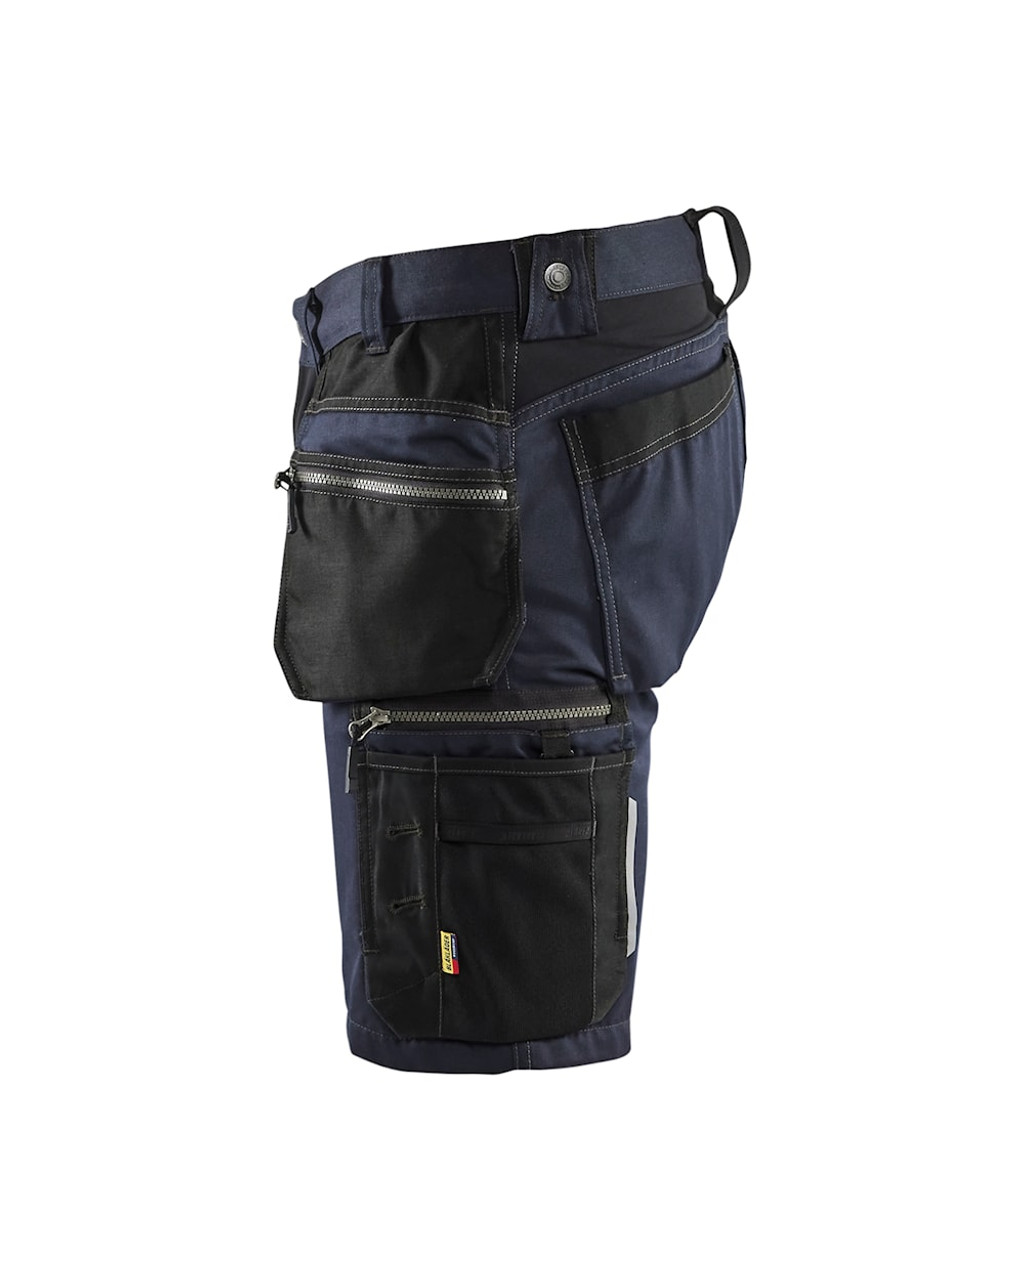 Suitable work Shorts available in Australia and New Zealand BLAKLADER Cordura with Stretch Dark Navy Blue Shorts for Carpenters